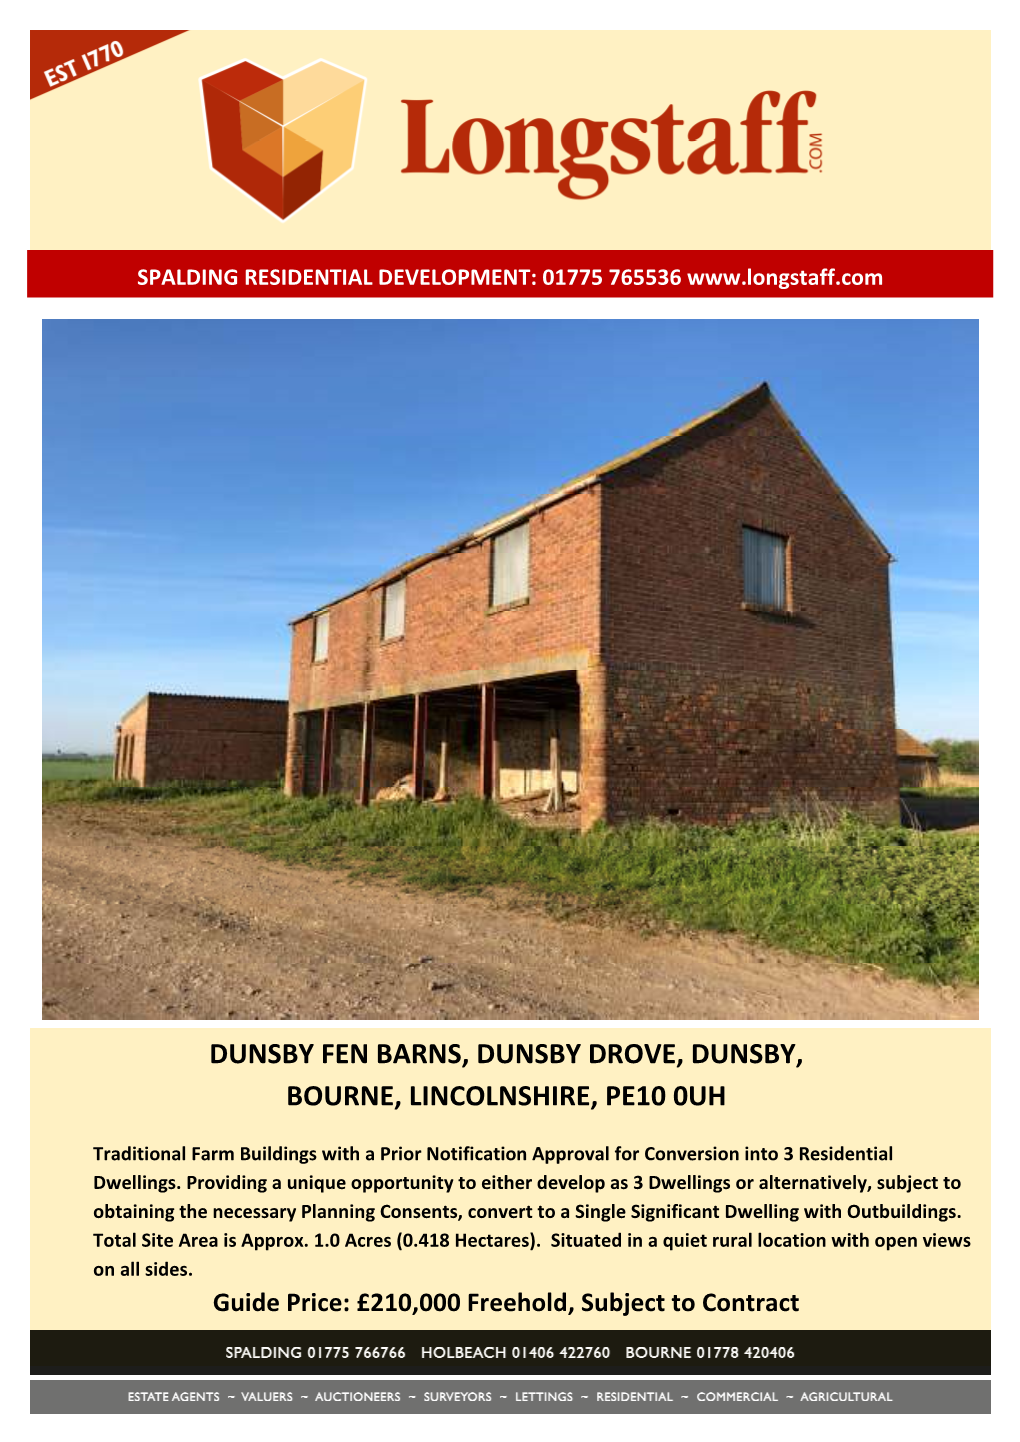 Dunsby Fen Barns, Dunsby Drove, Dunsby, Bourne, Lincolnshire, Pe10